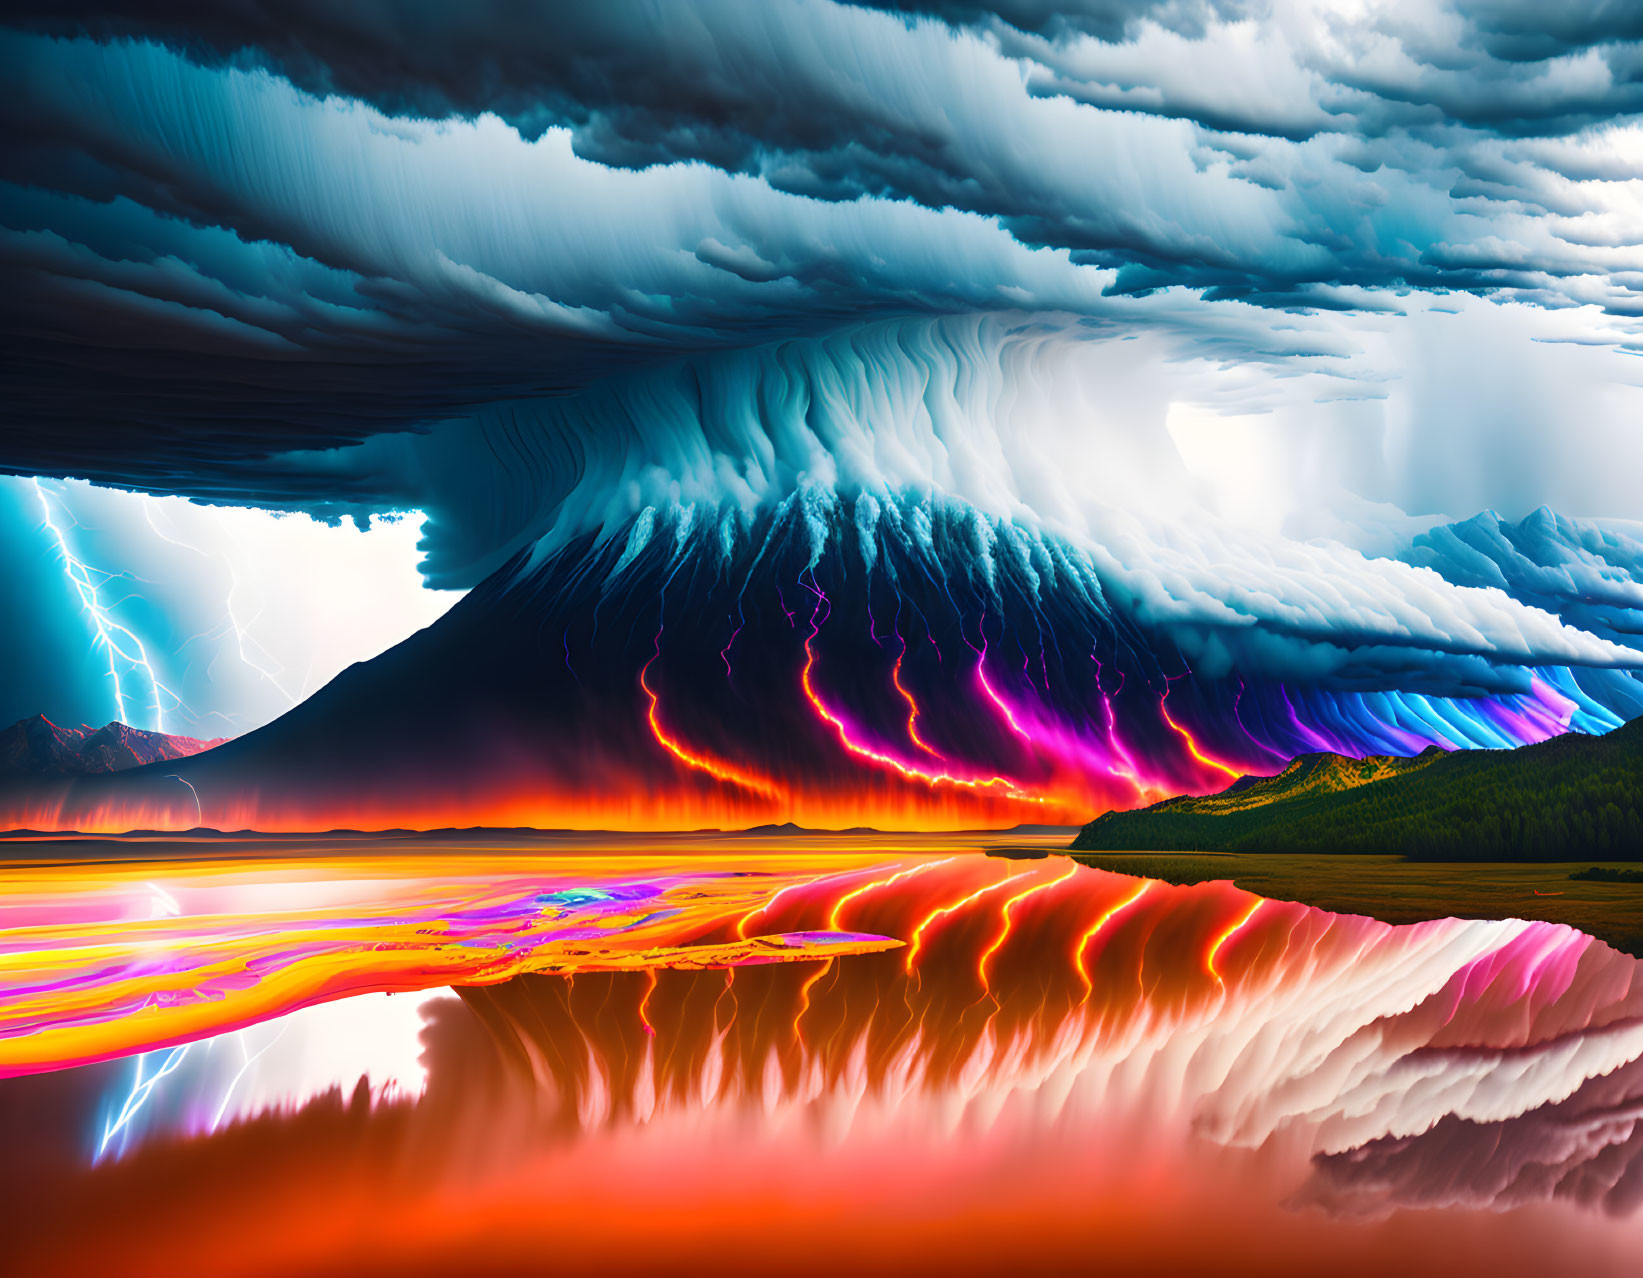 Surreal landscape with mountain, colorful sky, and neon water